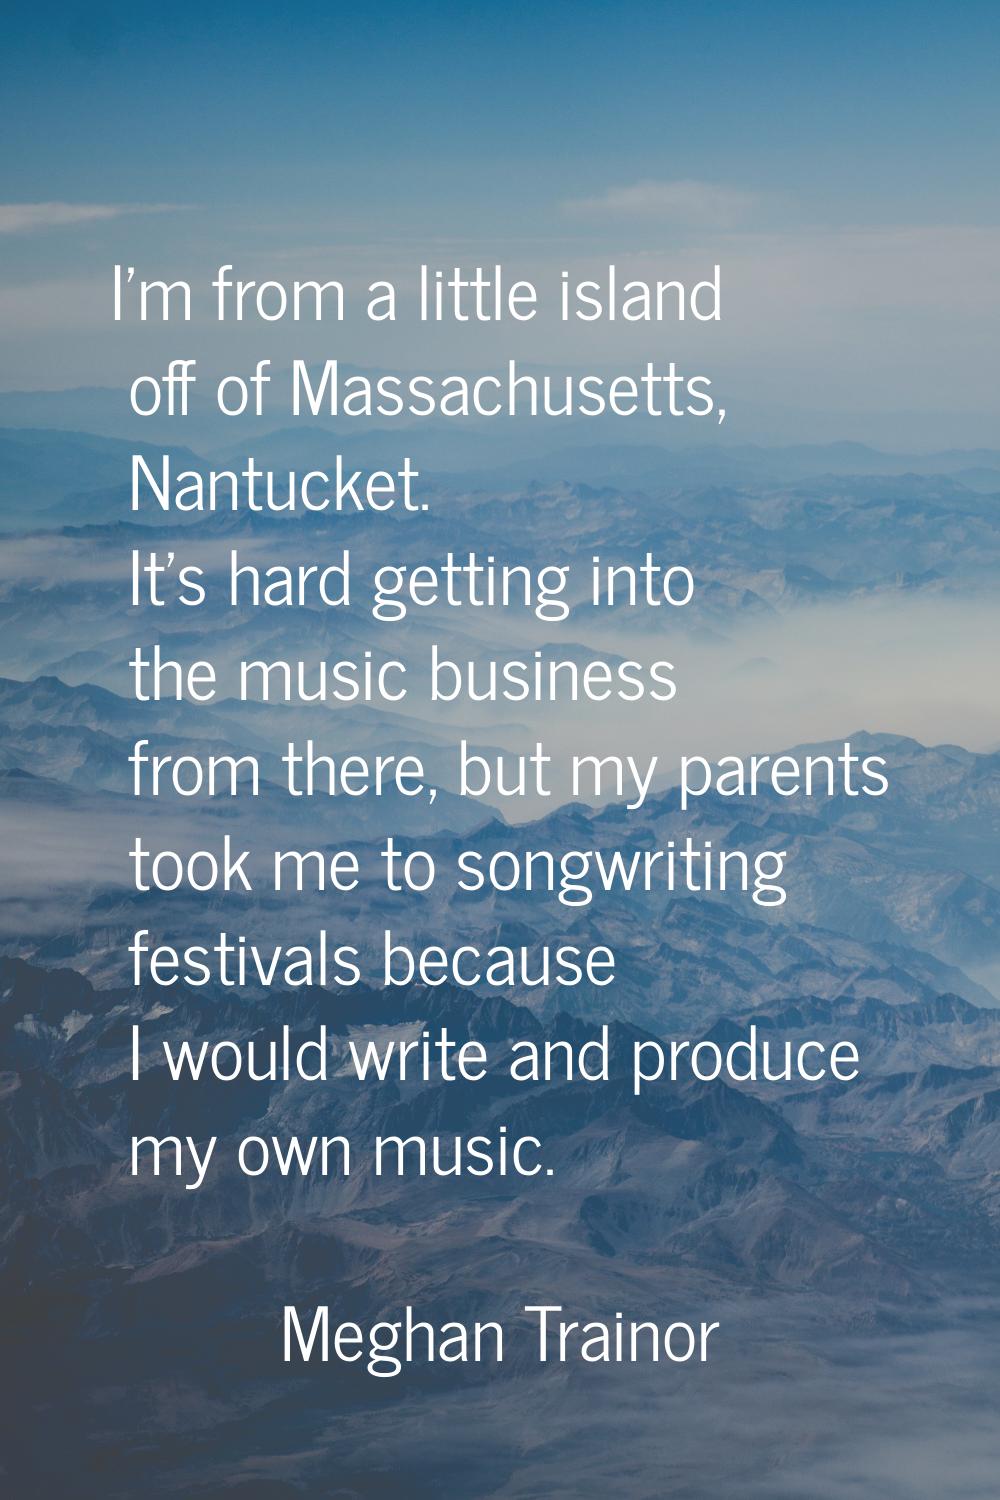 I'm from a little island off of Massachusetts, Nantucket. It's hard getting into the music business